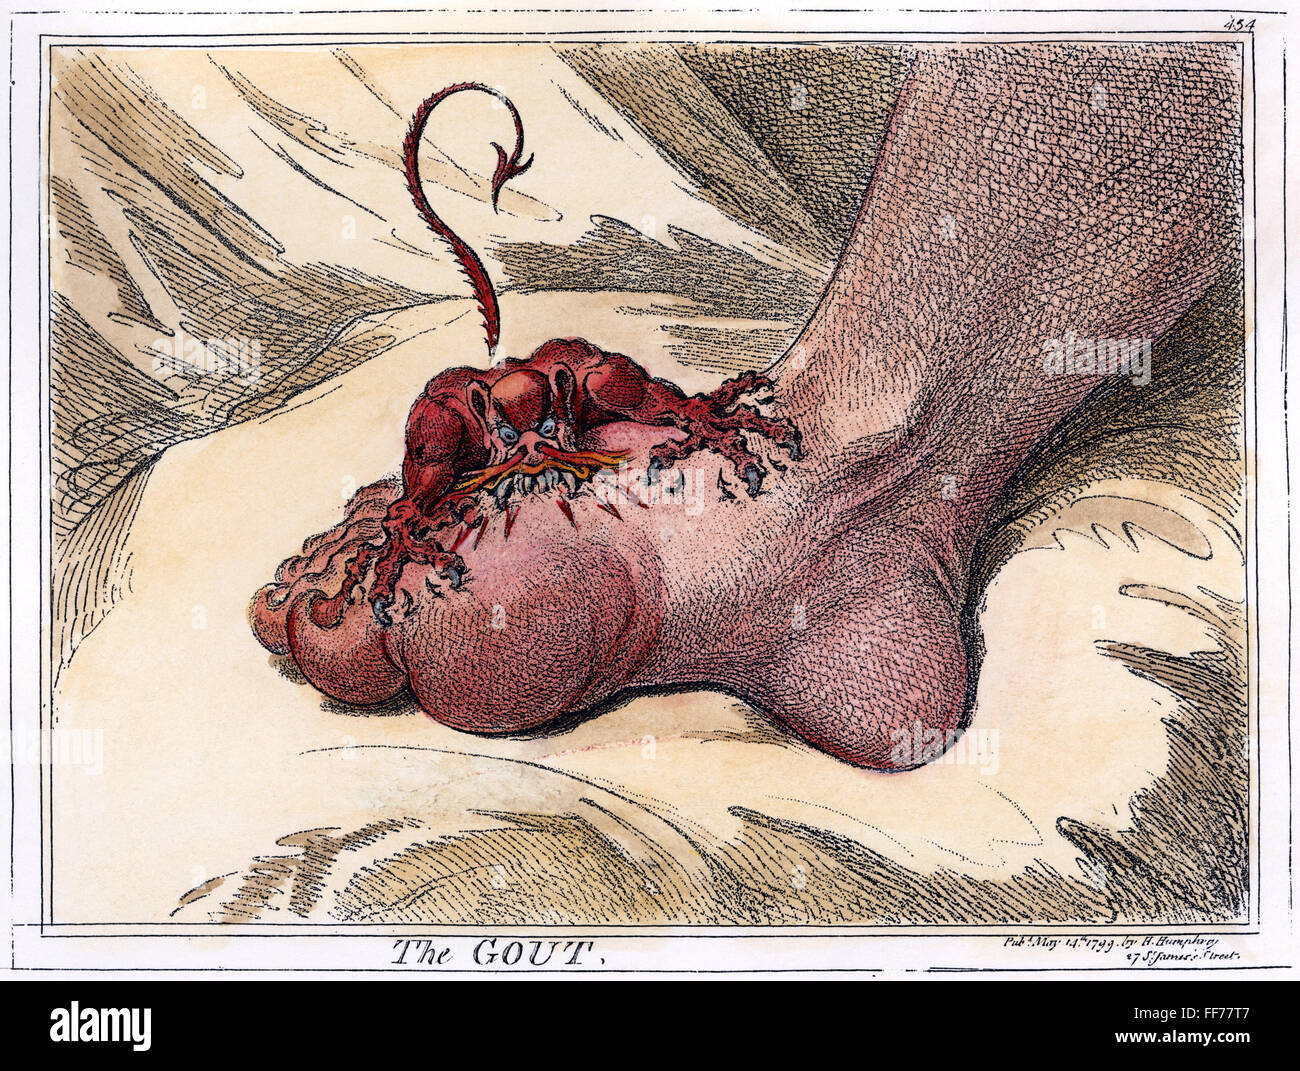 GOUT, 1799. /n'The Gout.' Etching, 1799, by James Gillray. Stock Photo